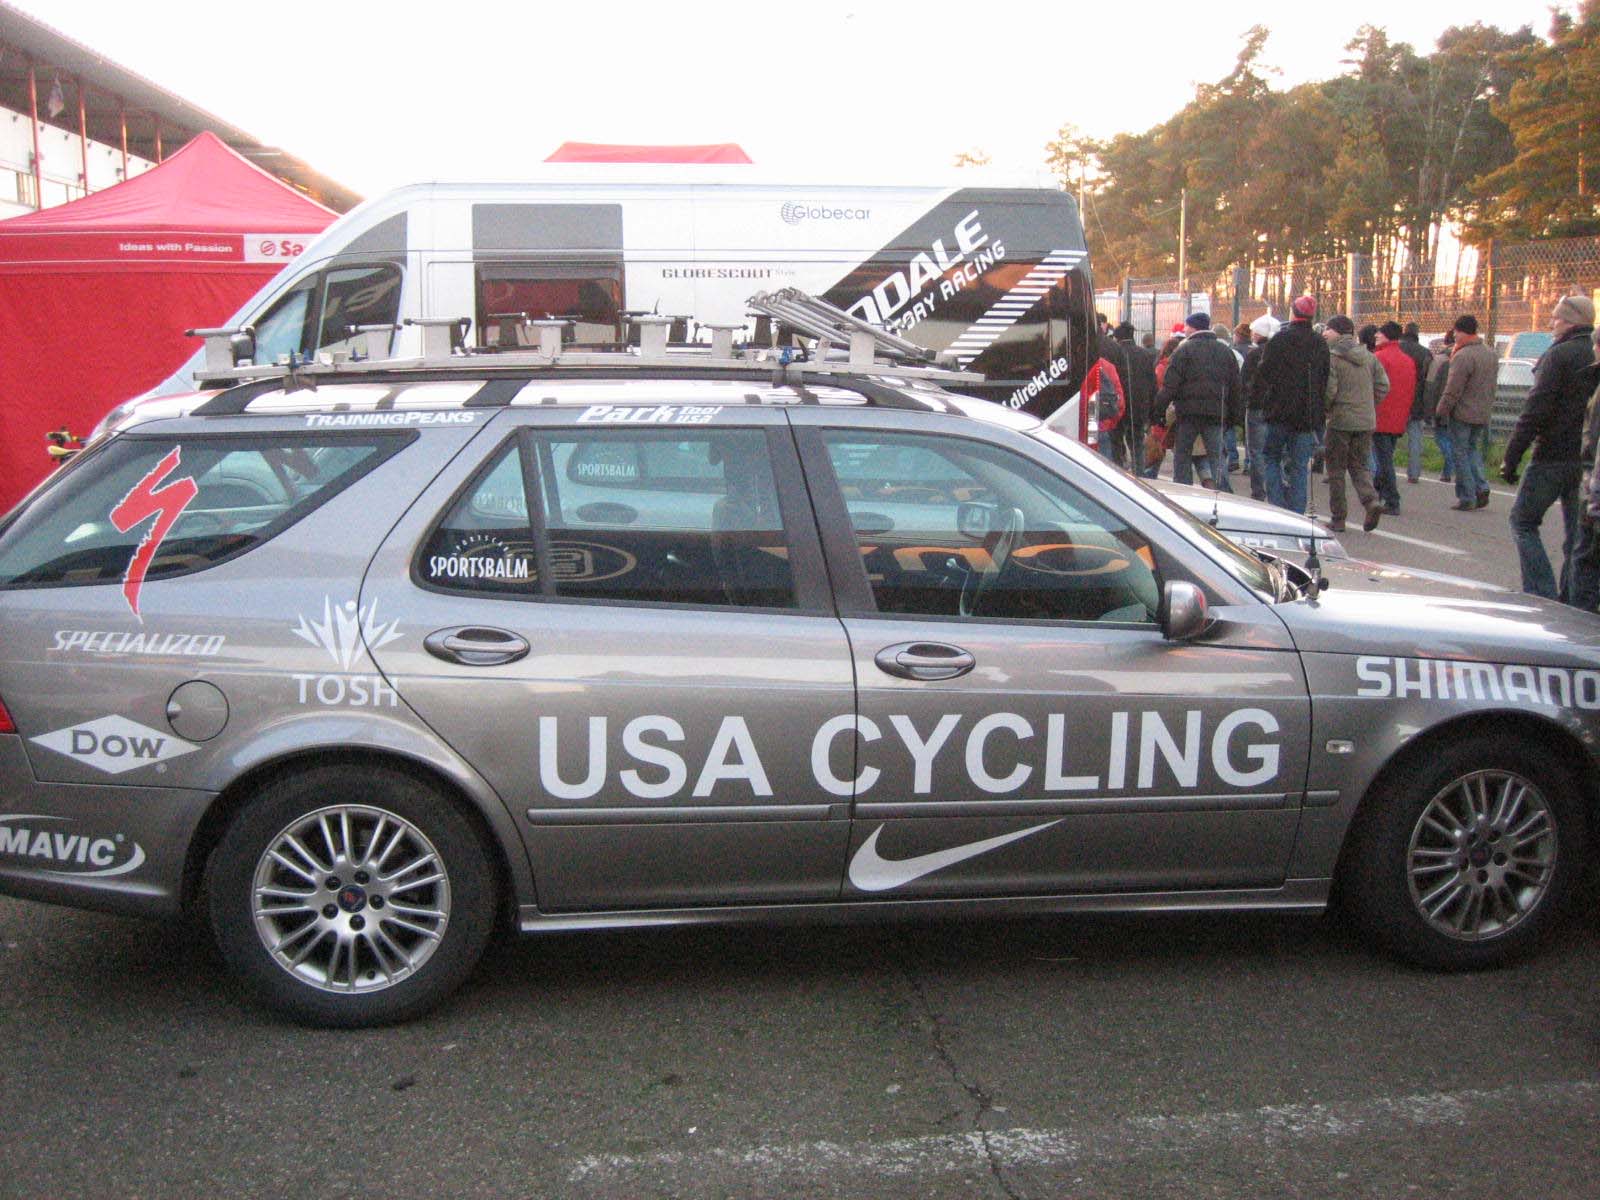 The USA Cycling cars paid for by USA riders.